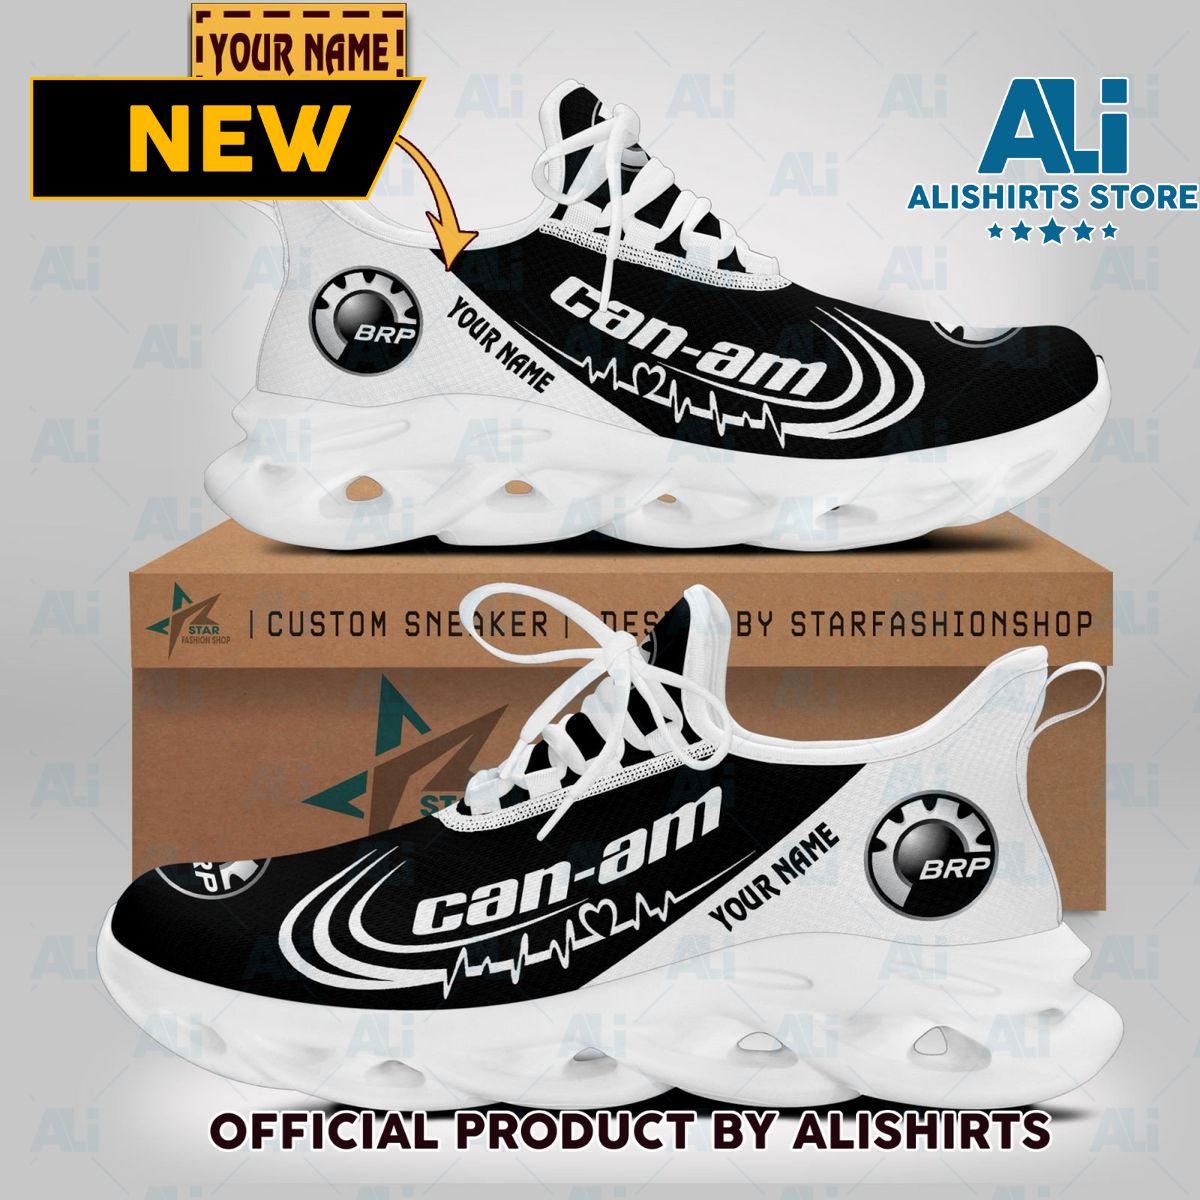 BRP-Can am Car Brand Lover Clunky Sneaker Max Soul Shoes